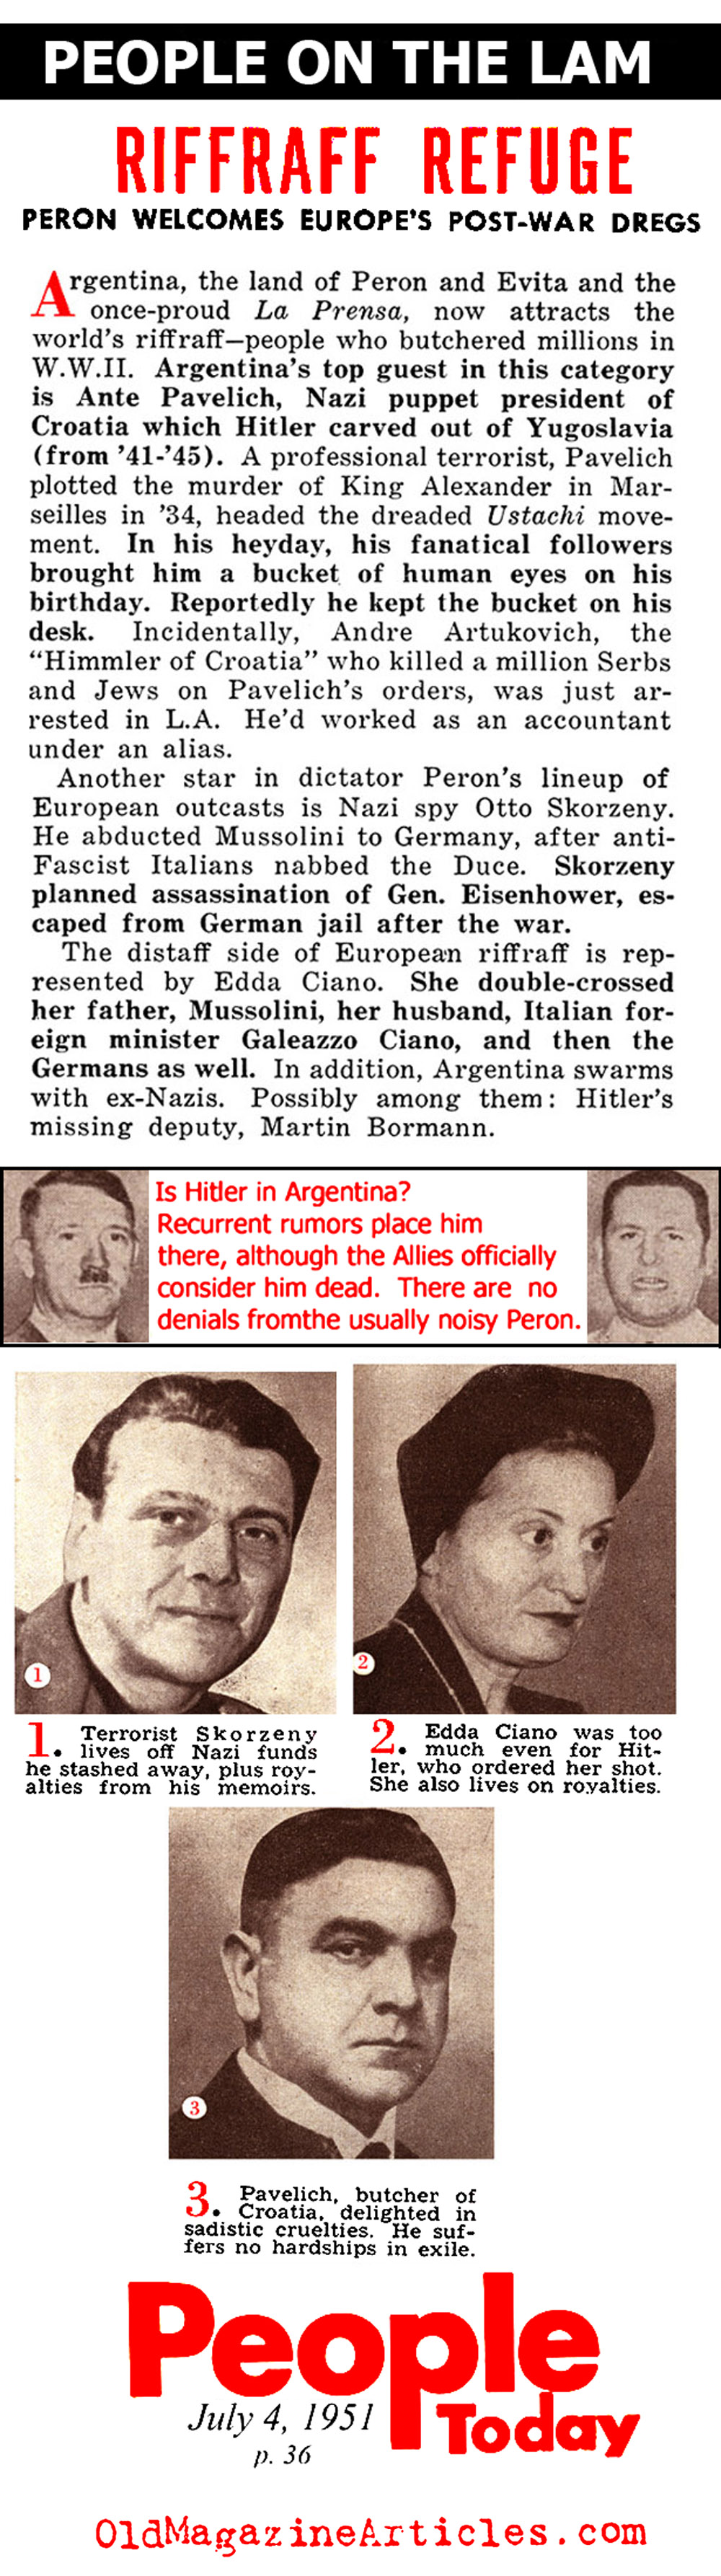 Unrepentant Fascists in Argentina (People Today, 1951)